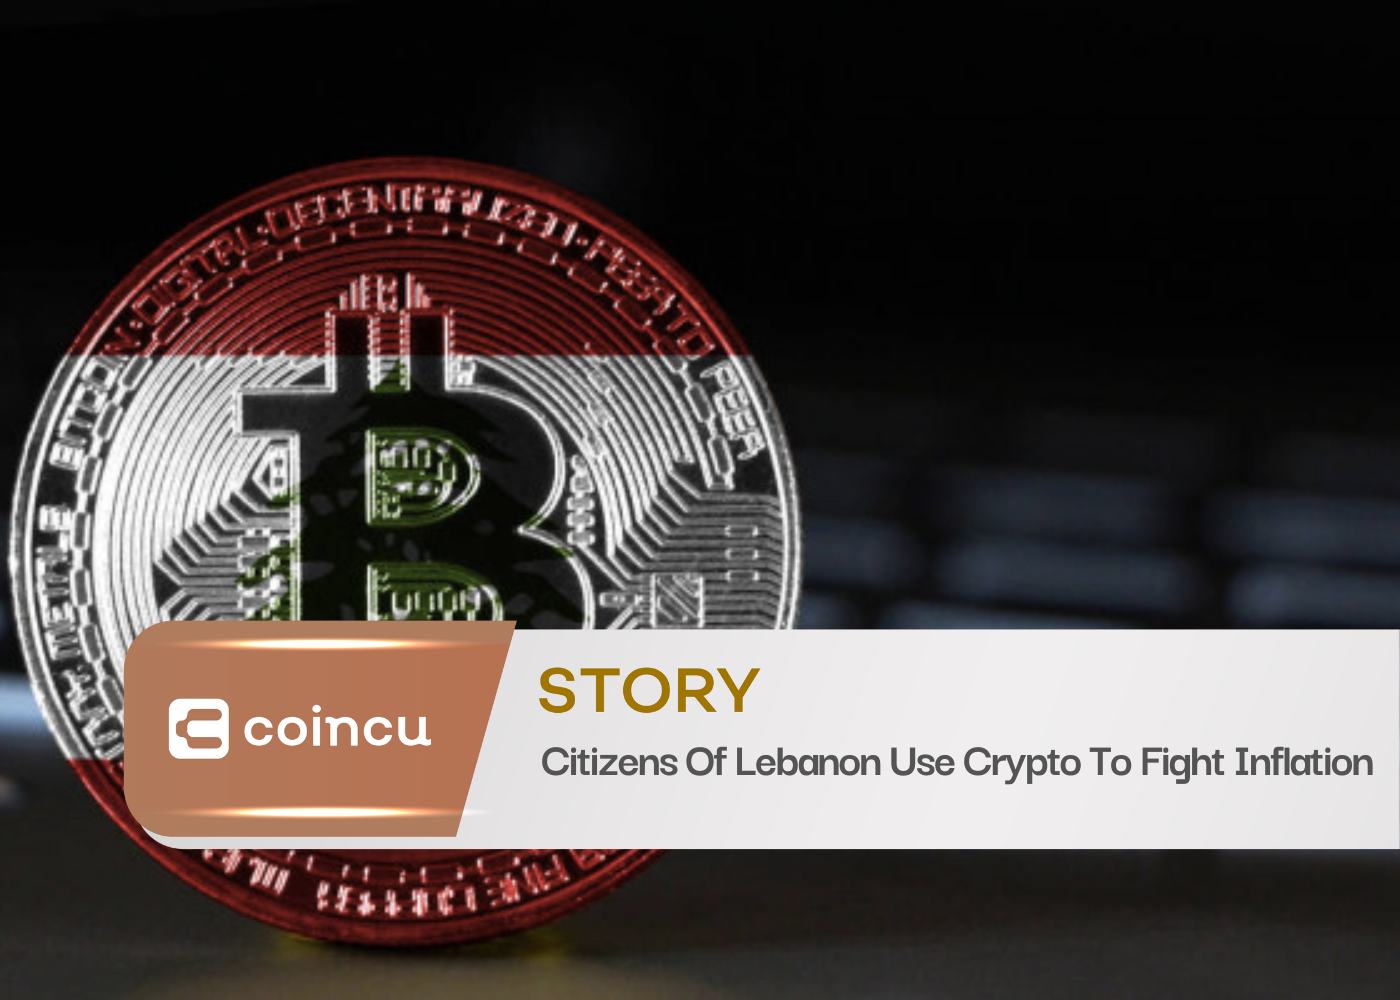 Citizens Of Lebanon Use Crypto To Fight Inflation